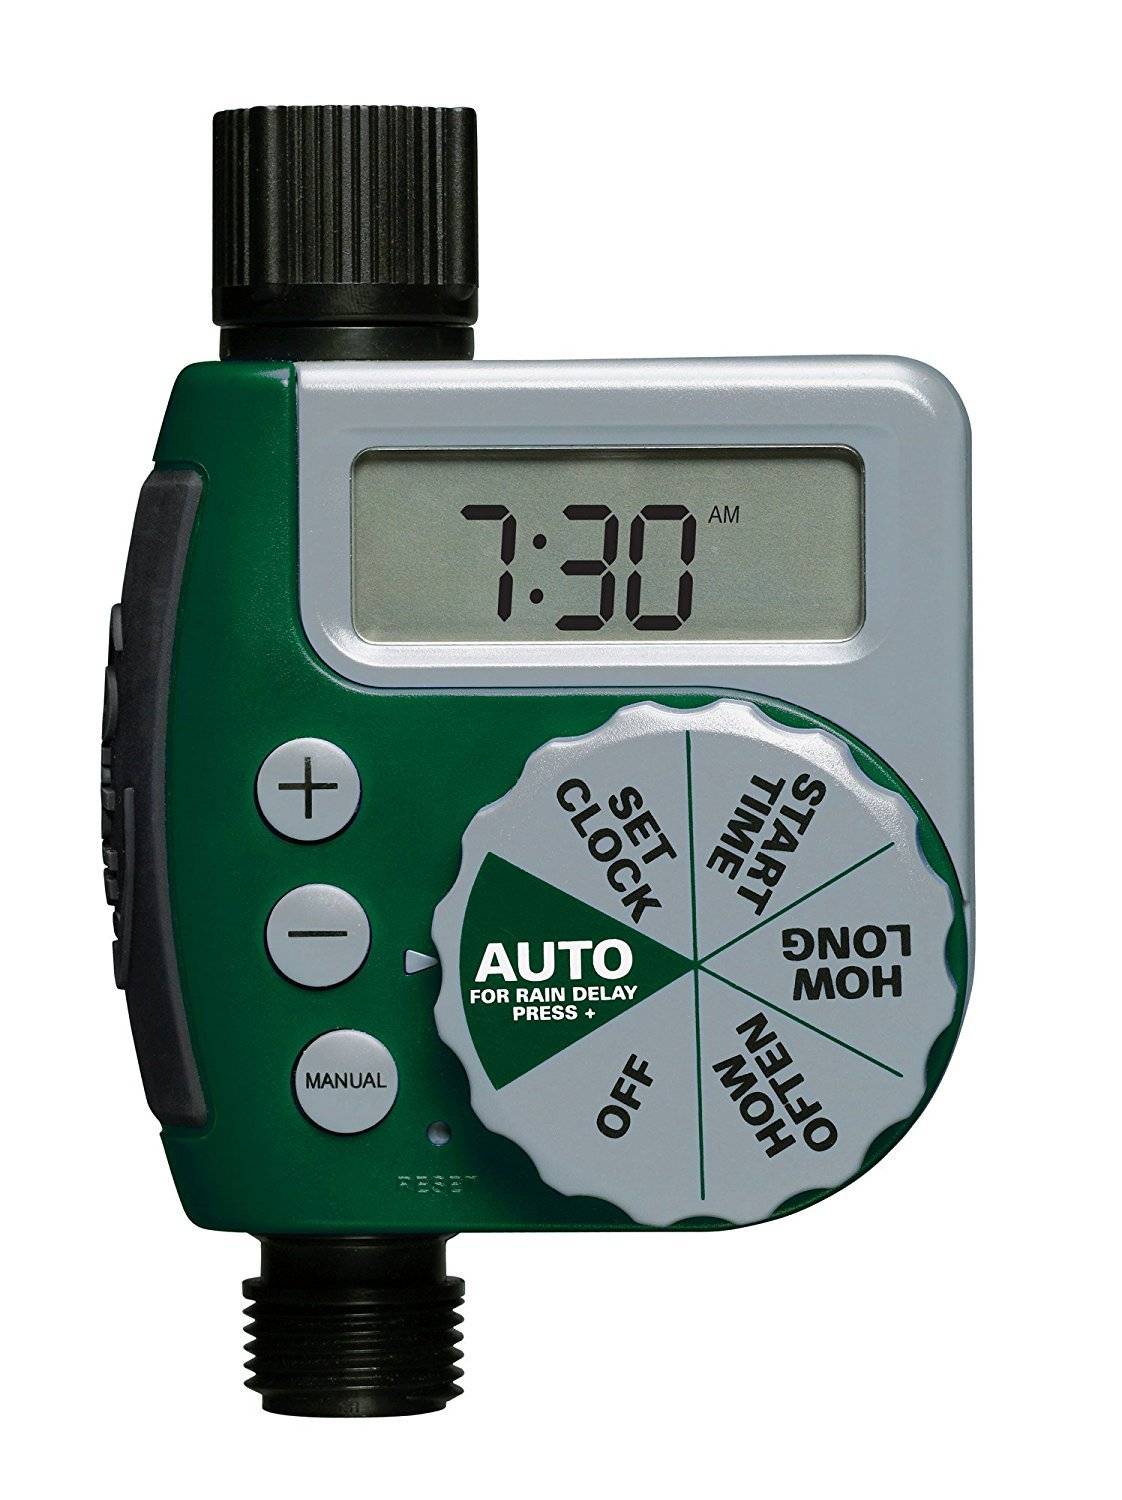 Hose timer for watering gardens